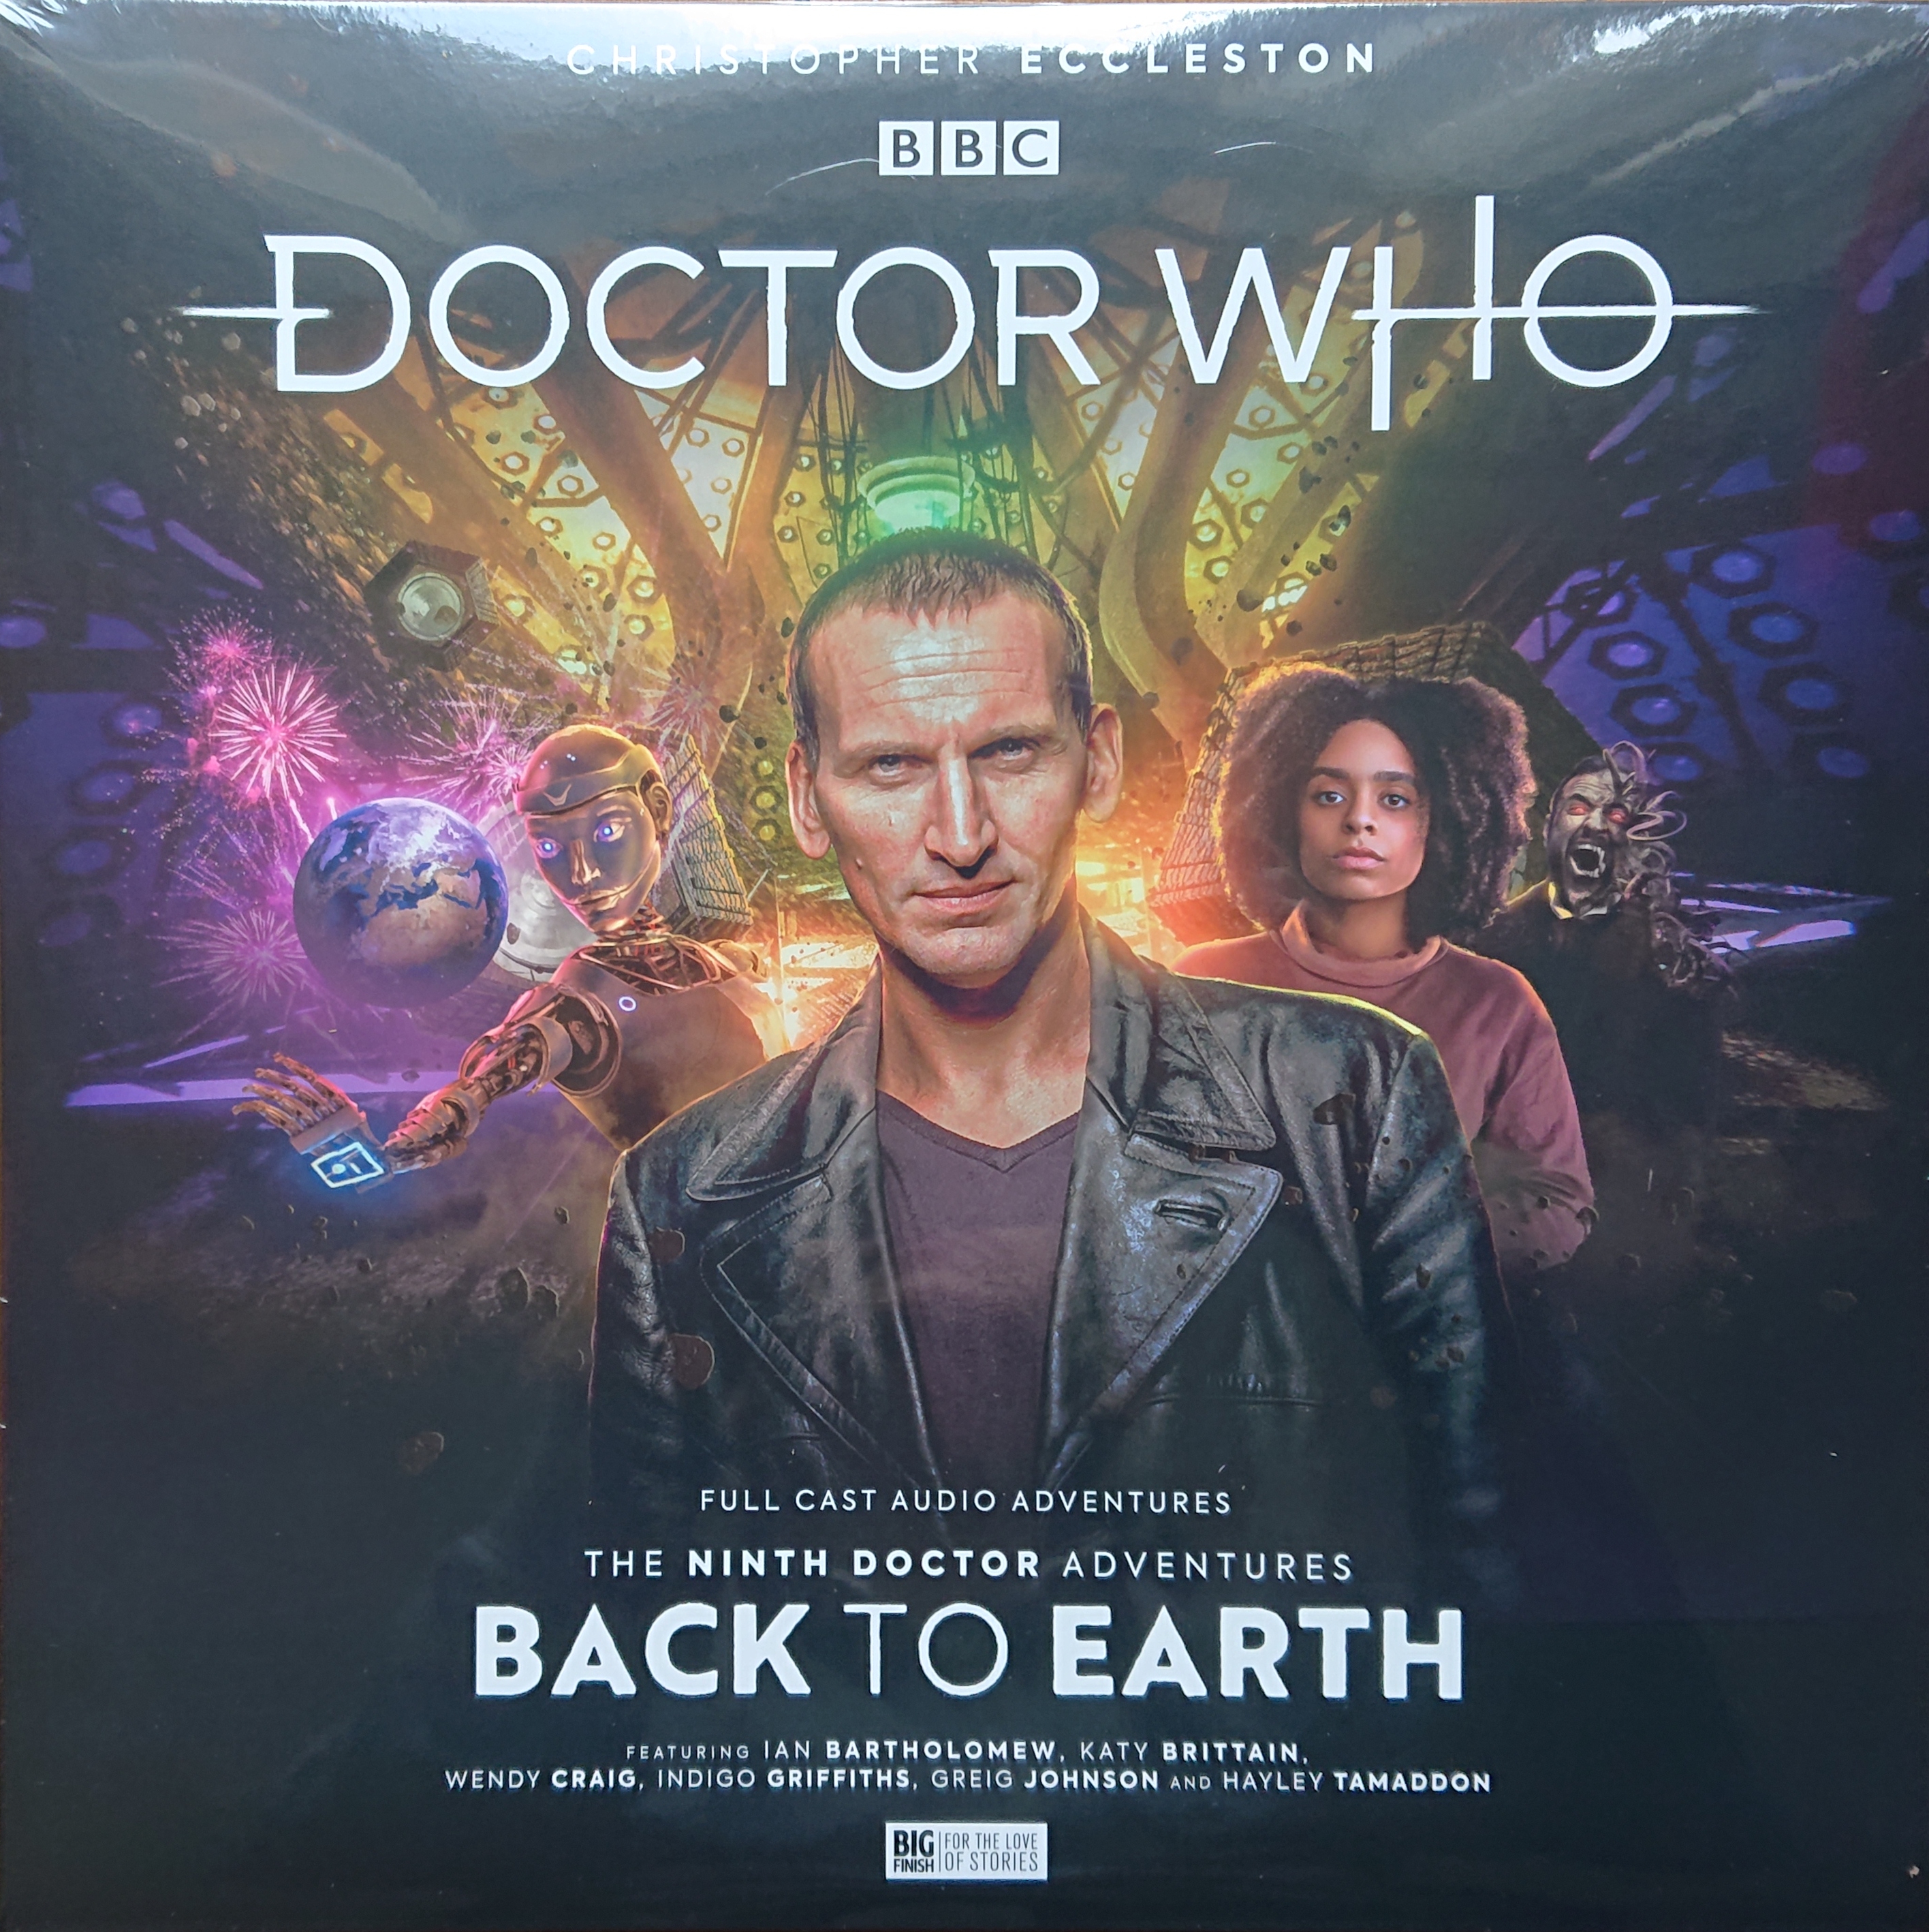 Picture of BFPDW9TH05V Doctor Who - The Ninth Doctor Adventures 2.1: Back to Earth by artist Robert Valentine / Sarah Grochala / Tim Foley from the BBC records and Tapes library